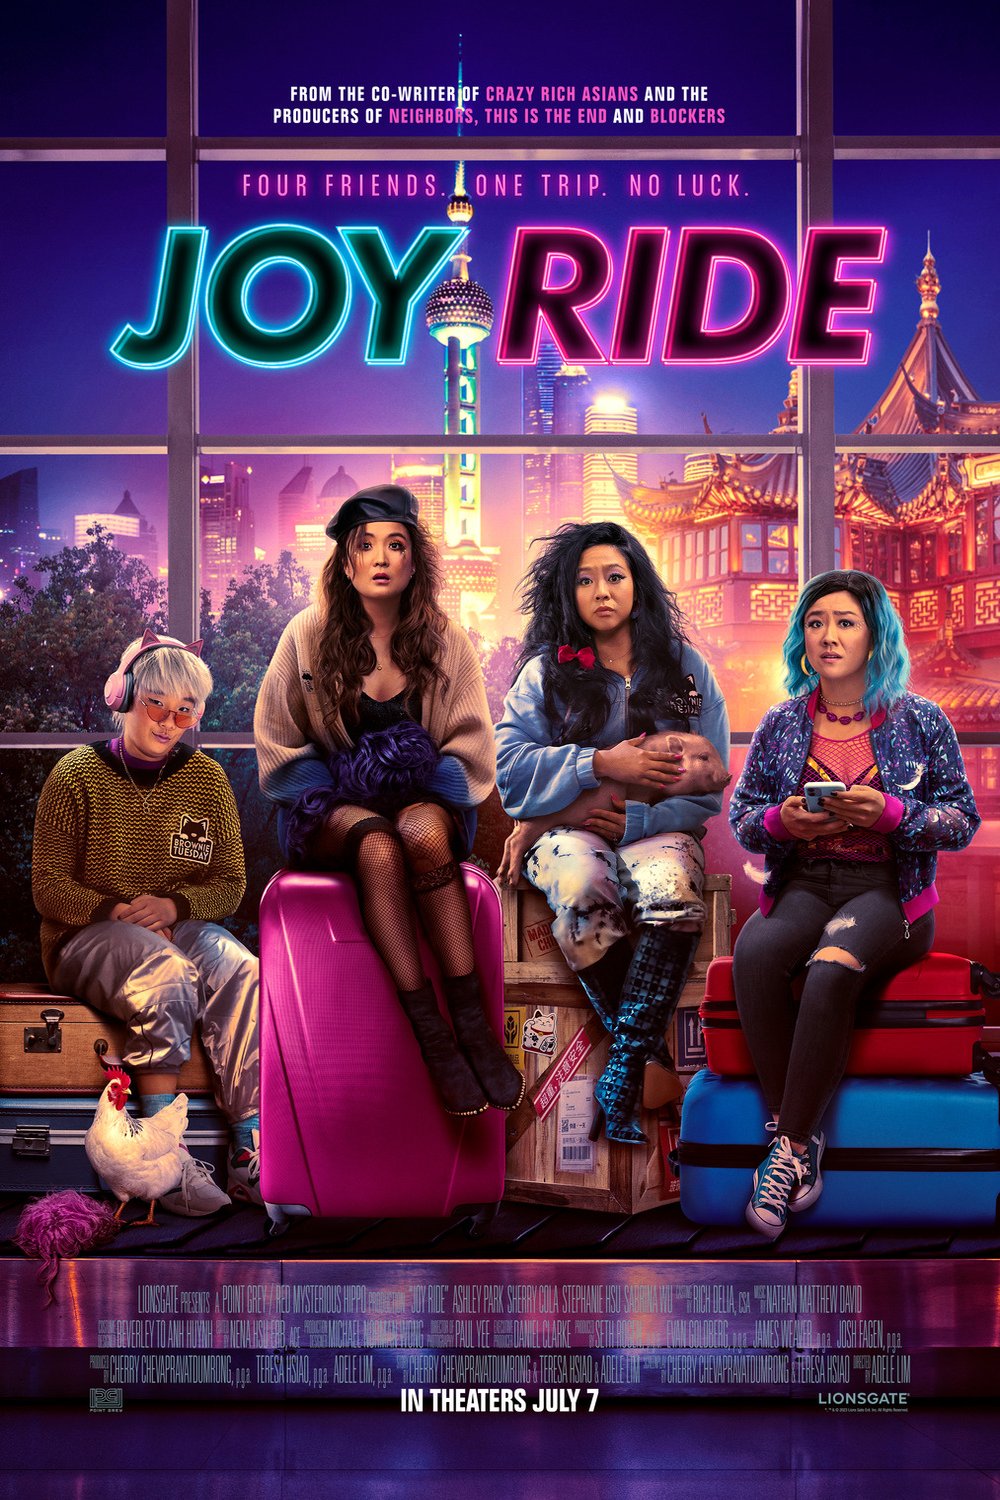 Poster of the movie Joy Ride